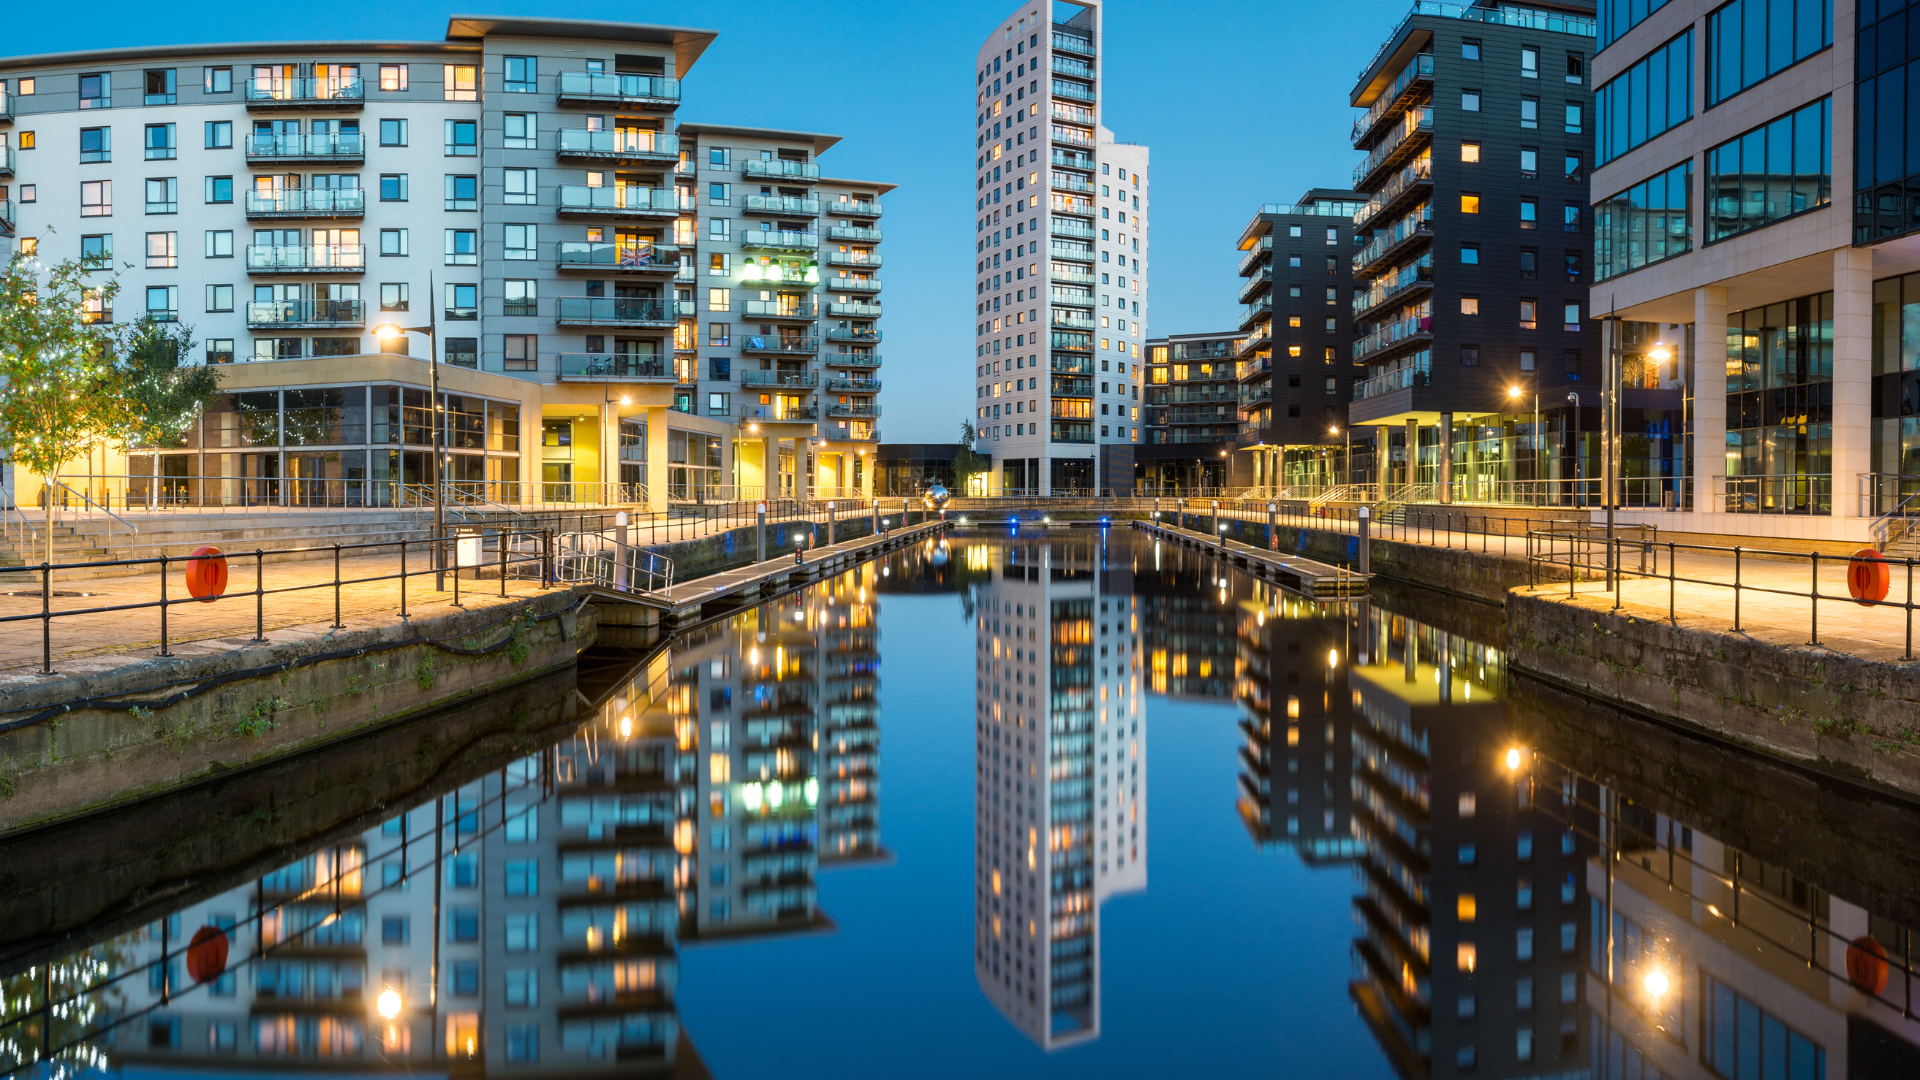 A photo of Leeds Dock in the evening, with the water running towards the residential and office blocks